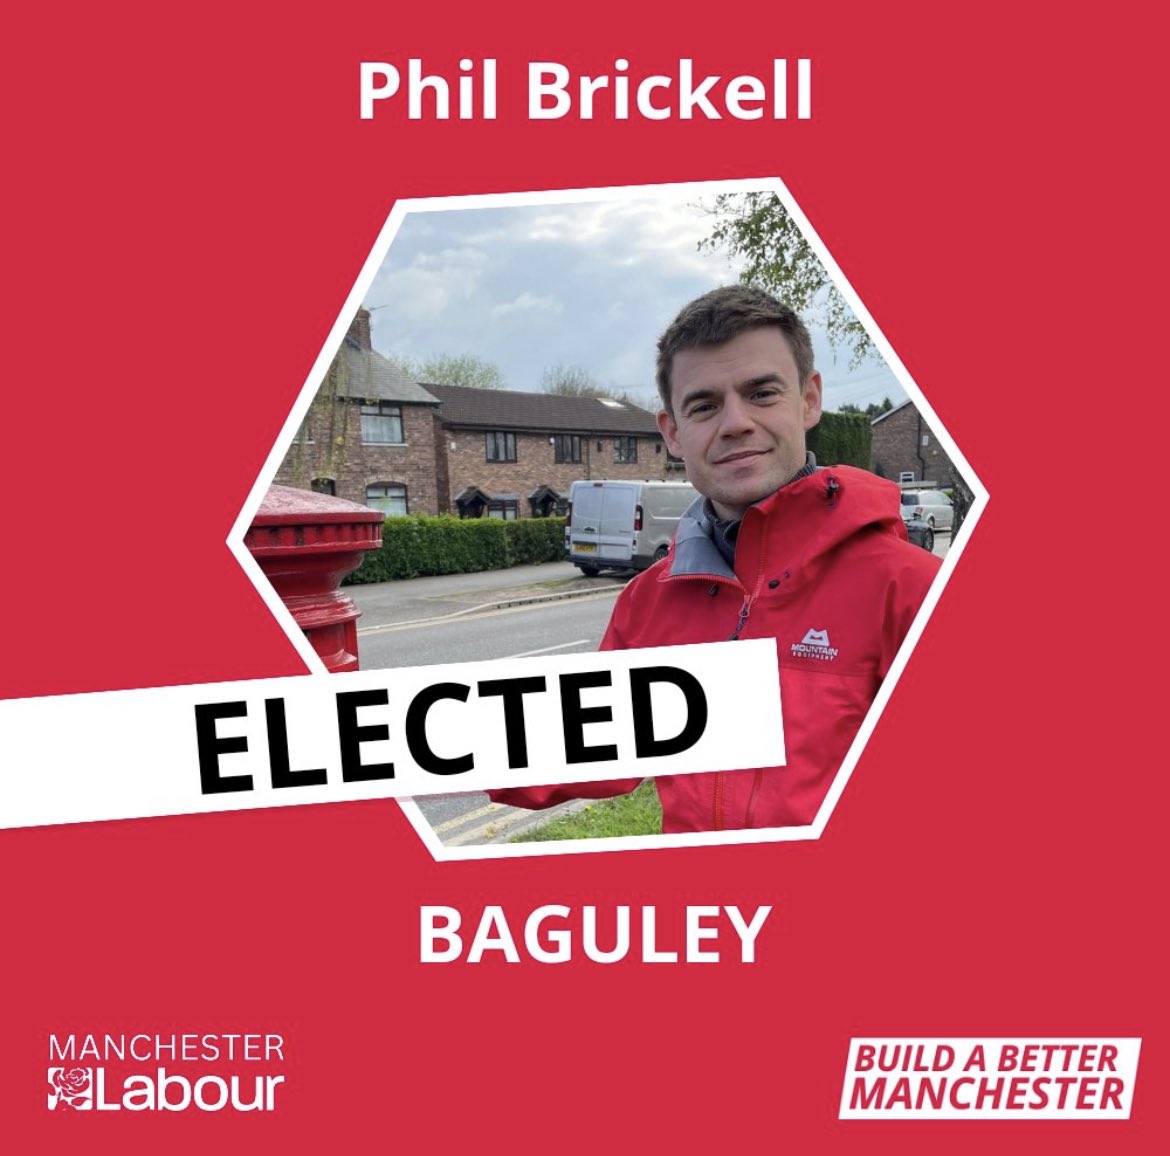 Congratulations @Phil_Brickell on being elected cllr for Baguley